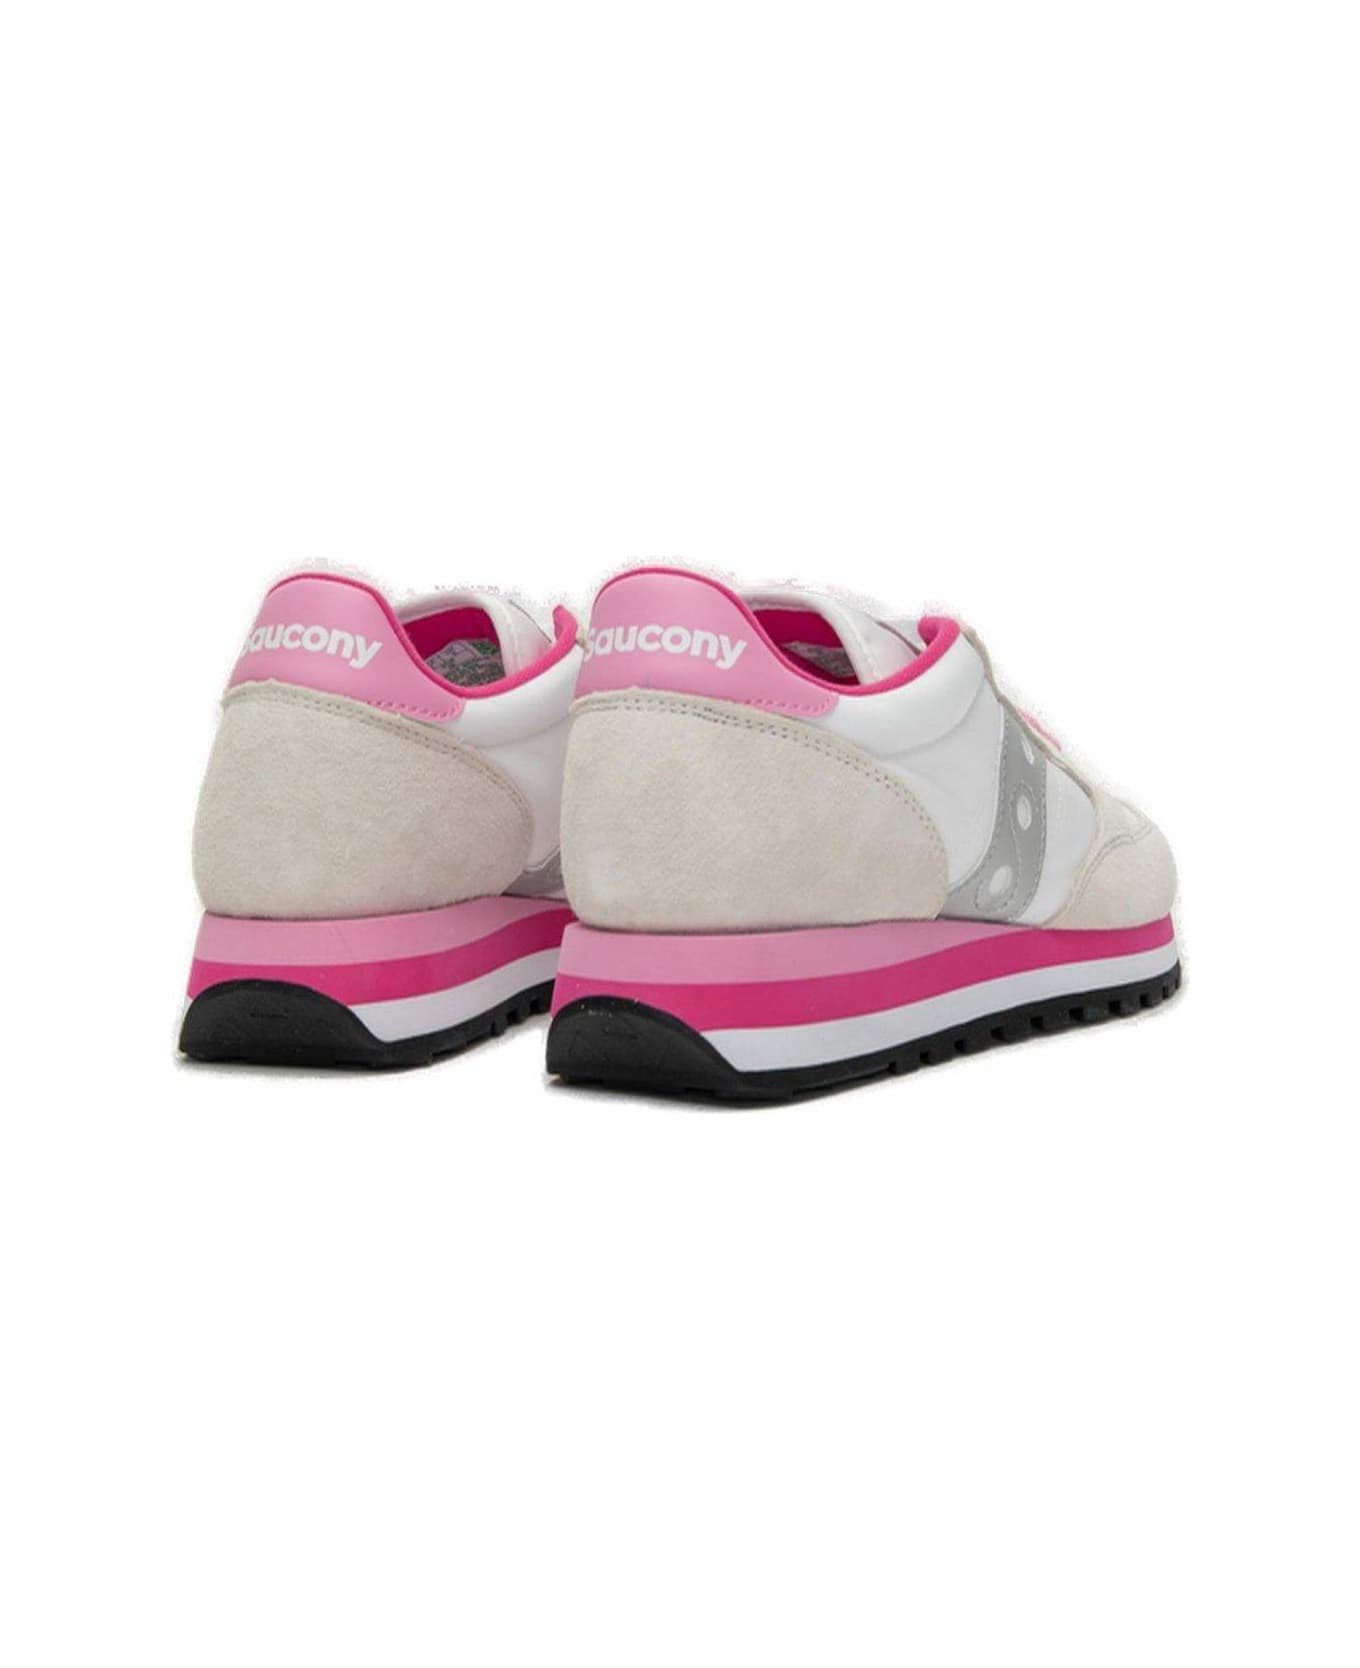 Saucony Jazz Triple Panelled Sneakers - White/grey/pink スニーカー